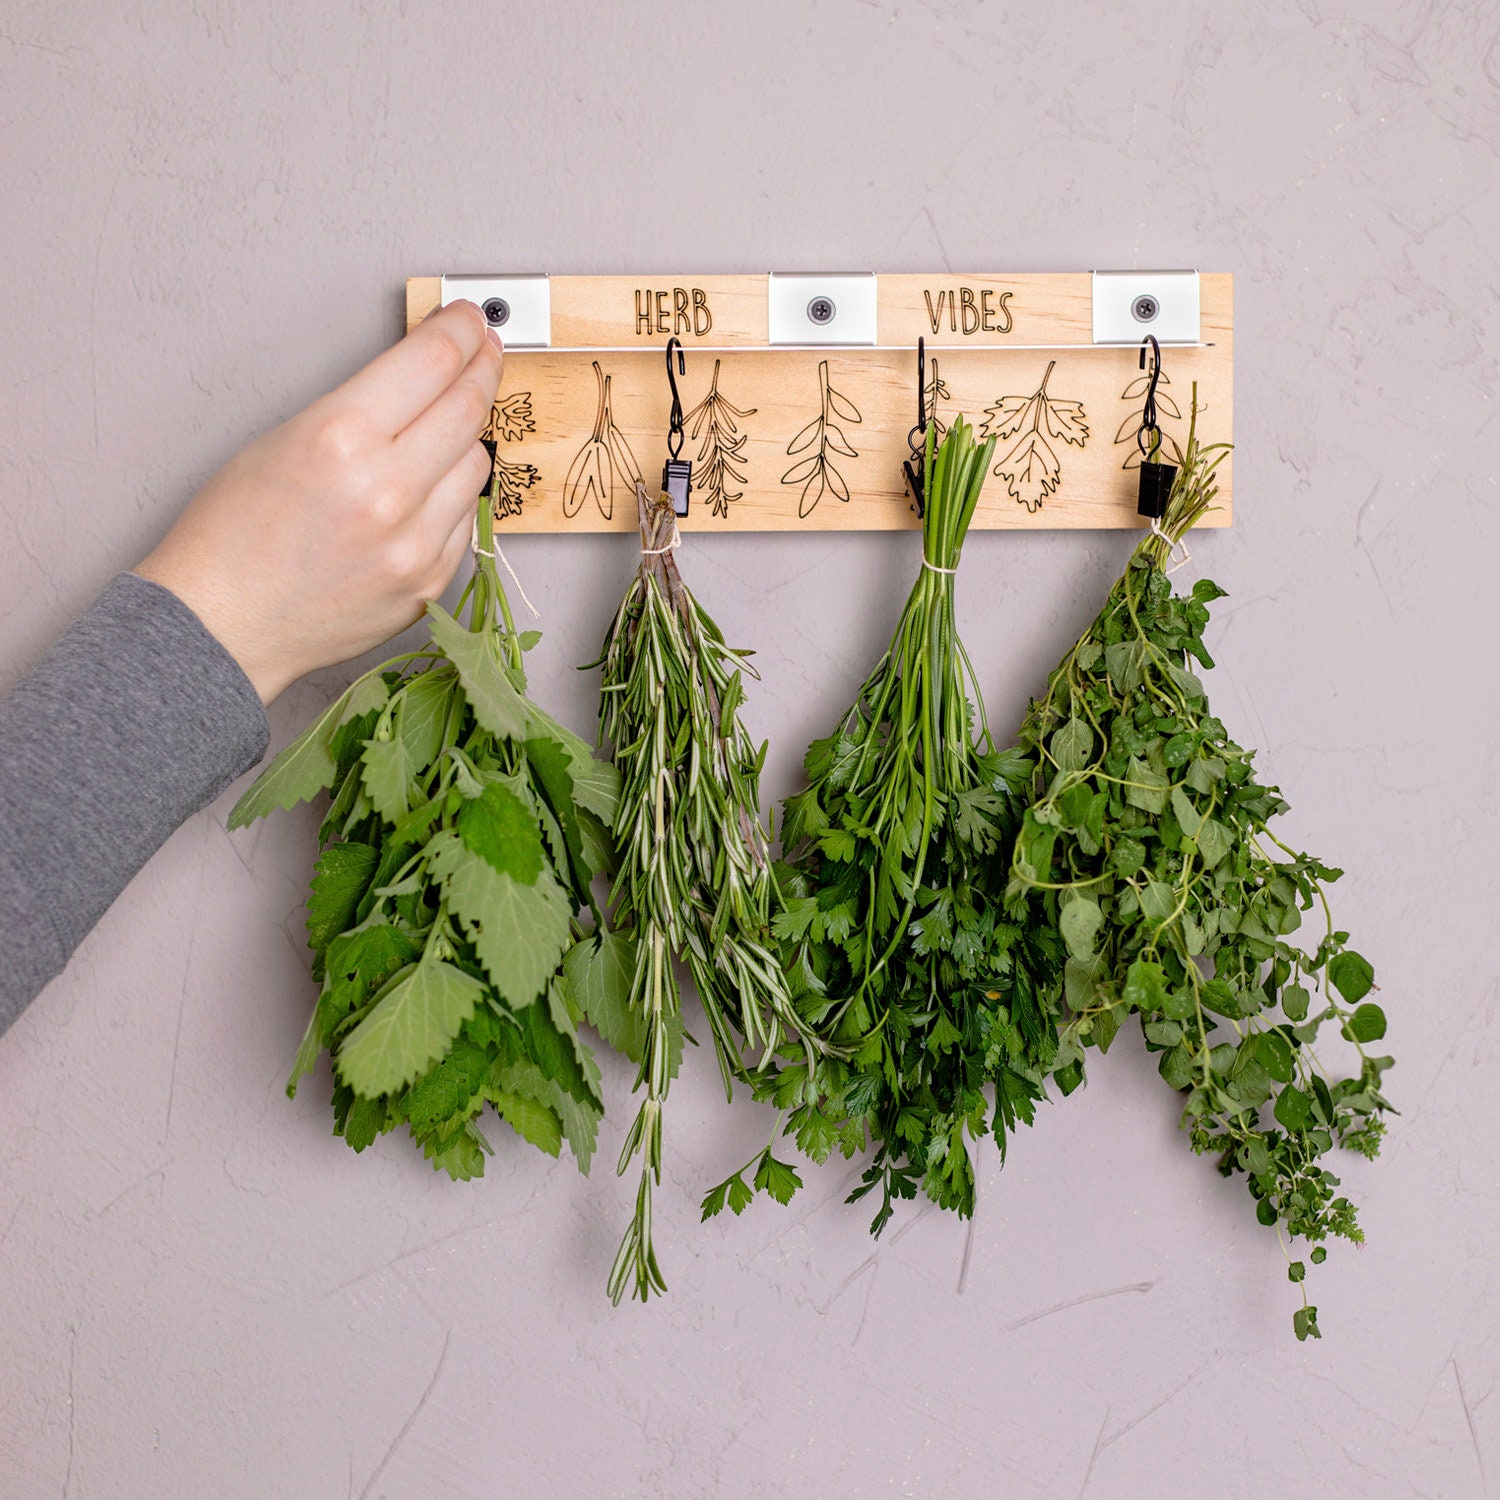 Macrame Herb Drying Rack With 15 Hooks Stylish Kitchen Decor For Drying  Herbs By Hanging From Hmkjhome, $9.29